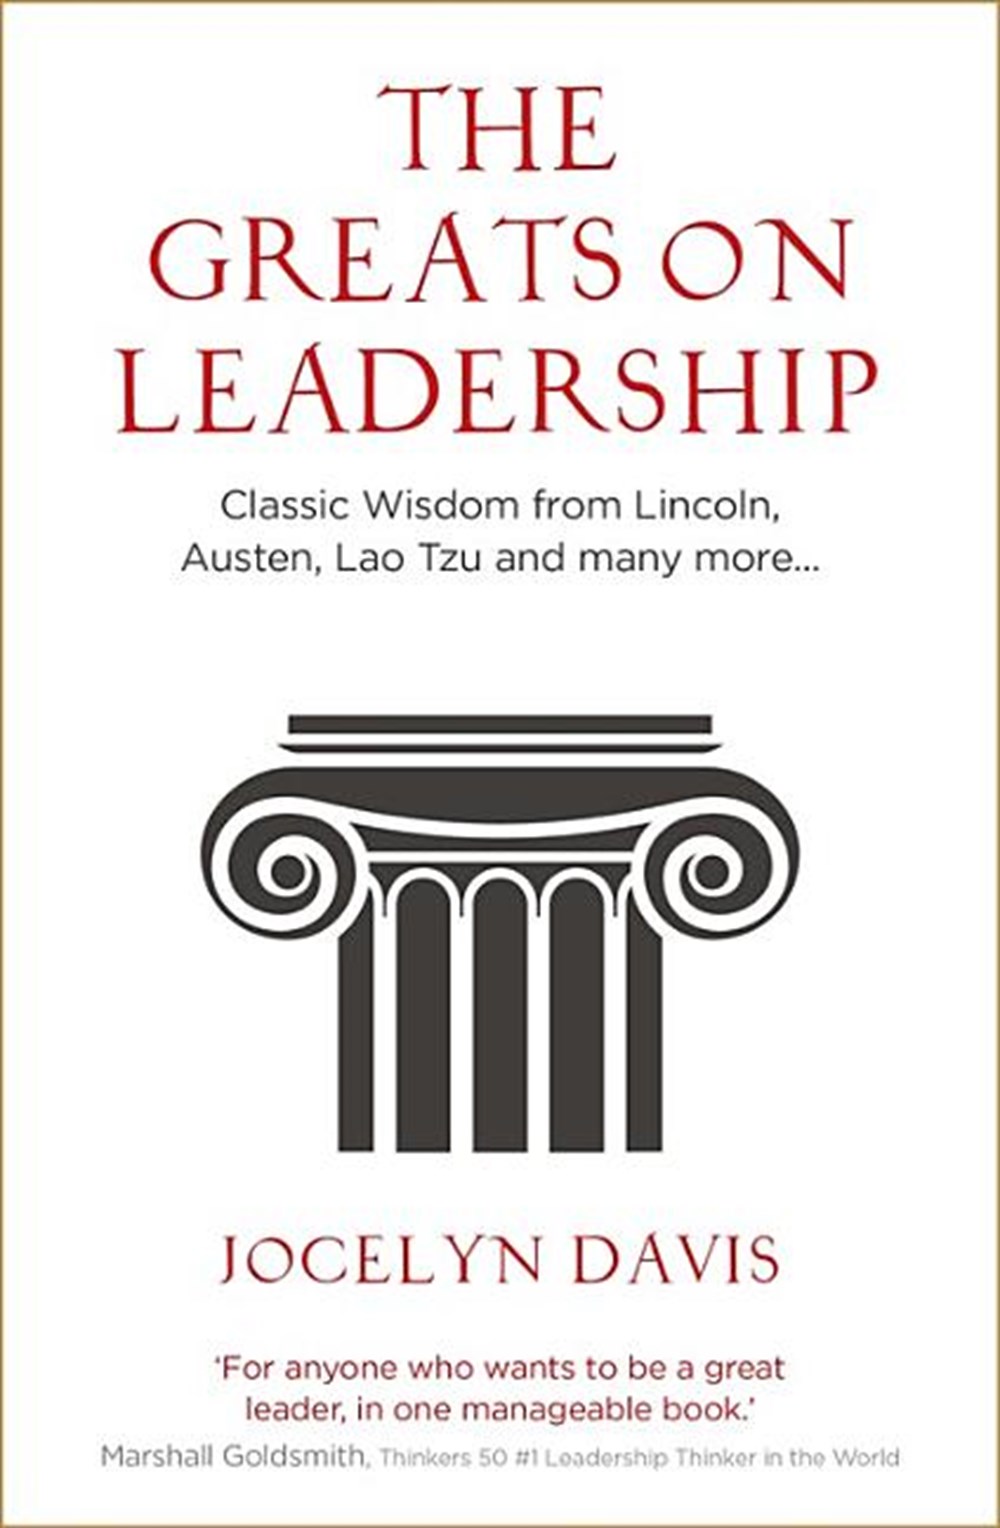 Greats on Leadership: Classic Wisdom from Lincoln, Austen, Lao Tzu and Many More